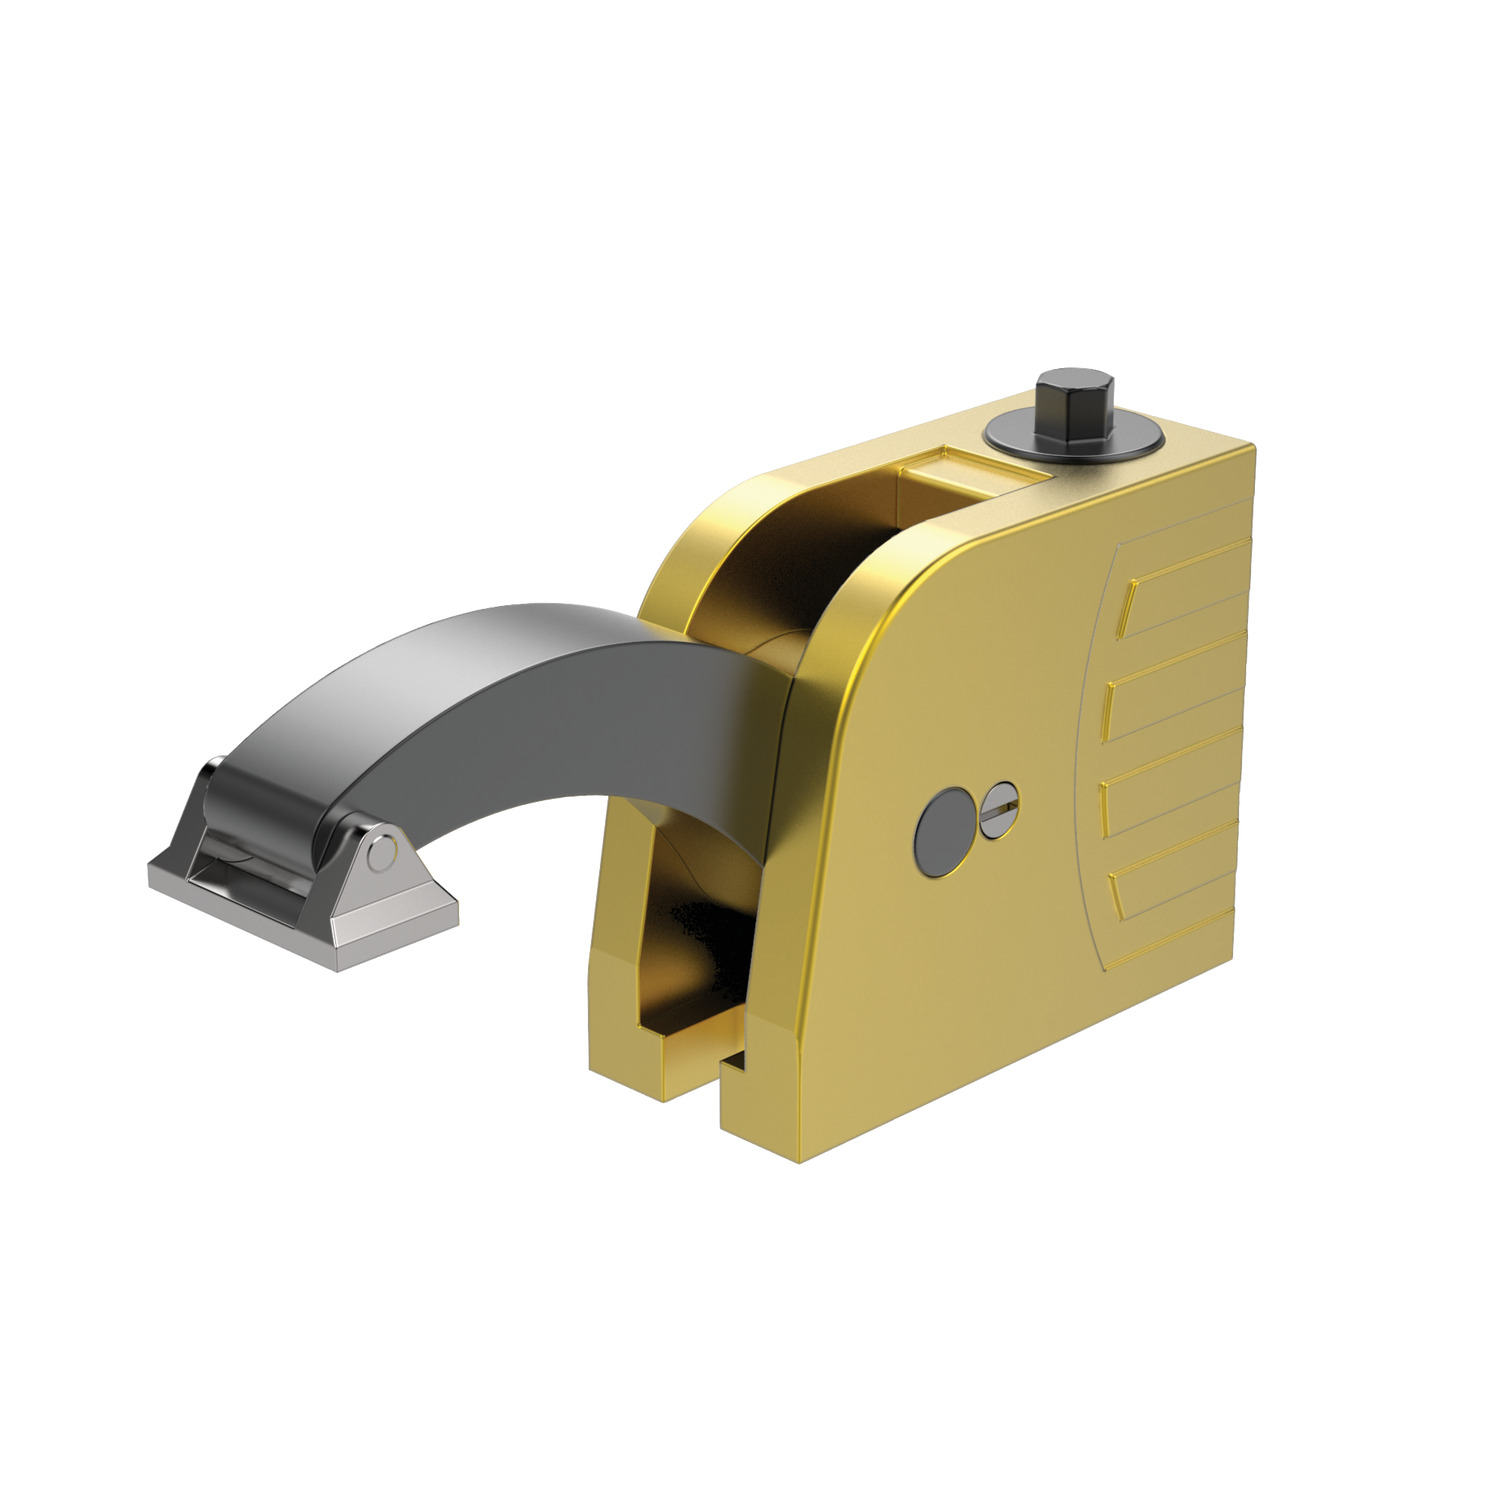 Piccolo Clamps The Kopal Piccolo Clamps are used for over height clamping with its compact structure you will benefit from its power of upto 6.2kN of clamping force.